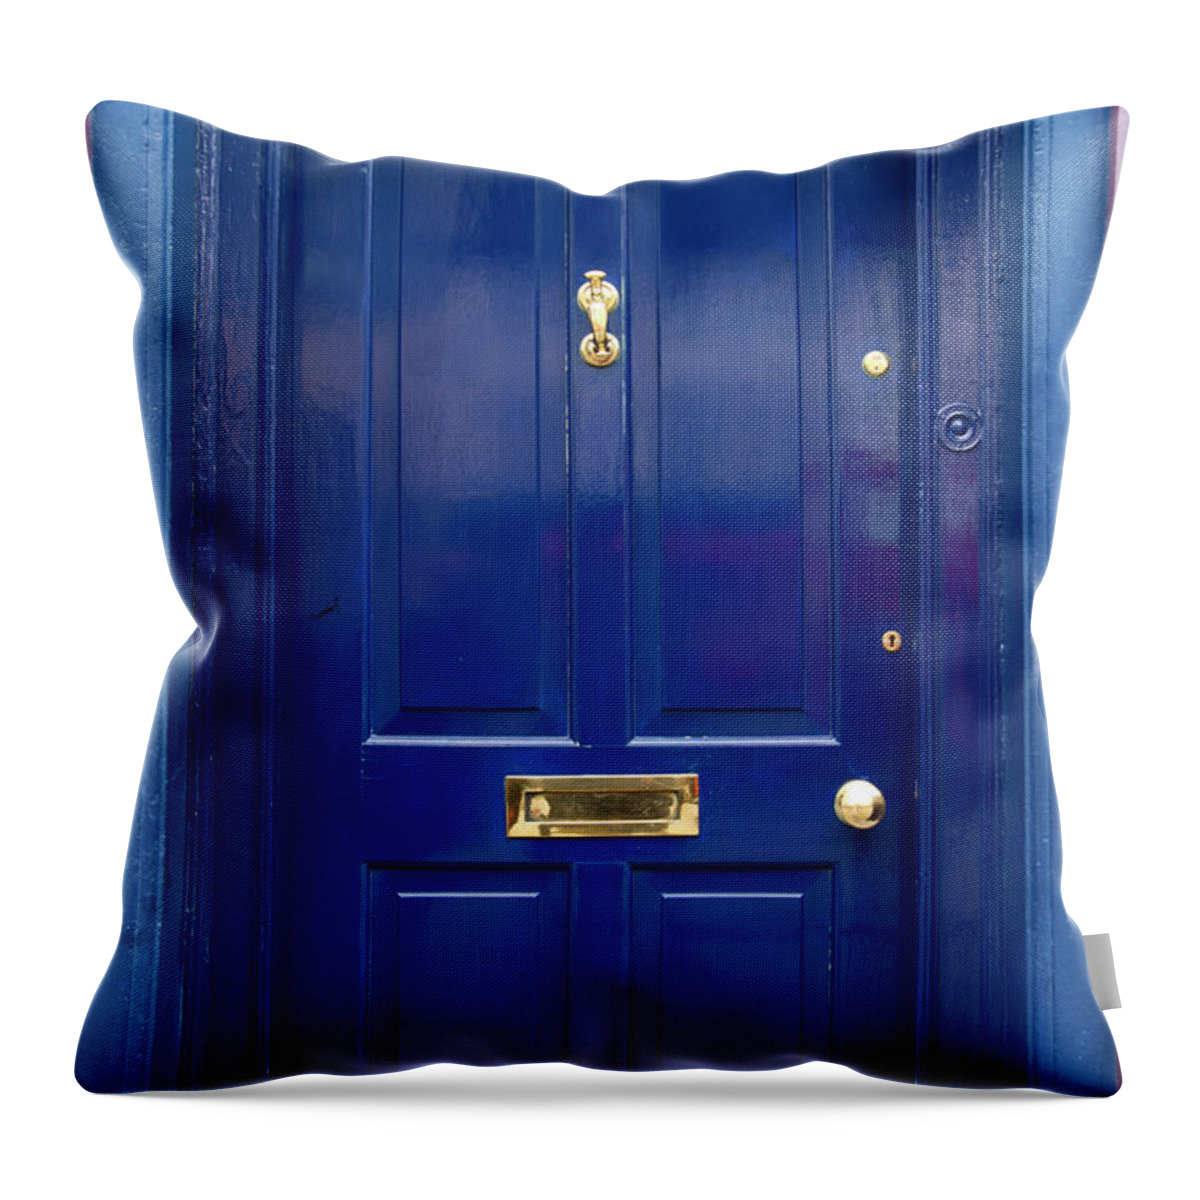 Outdoors Throw Pillow featuring the photograph Door In High Street, County Kilkenny by Nico Tondini